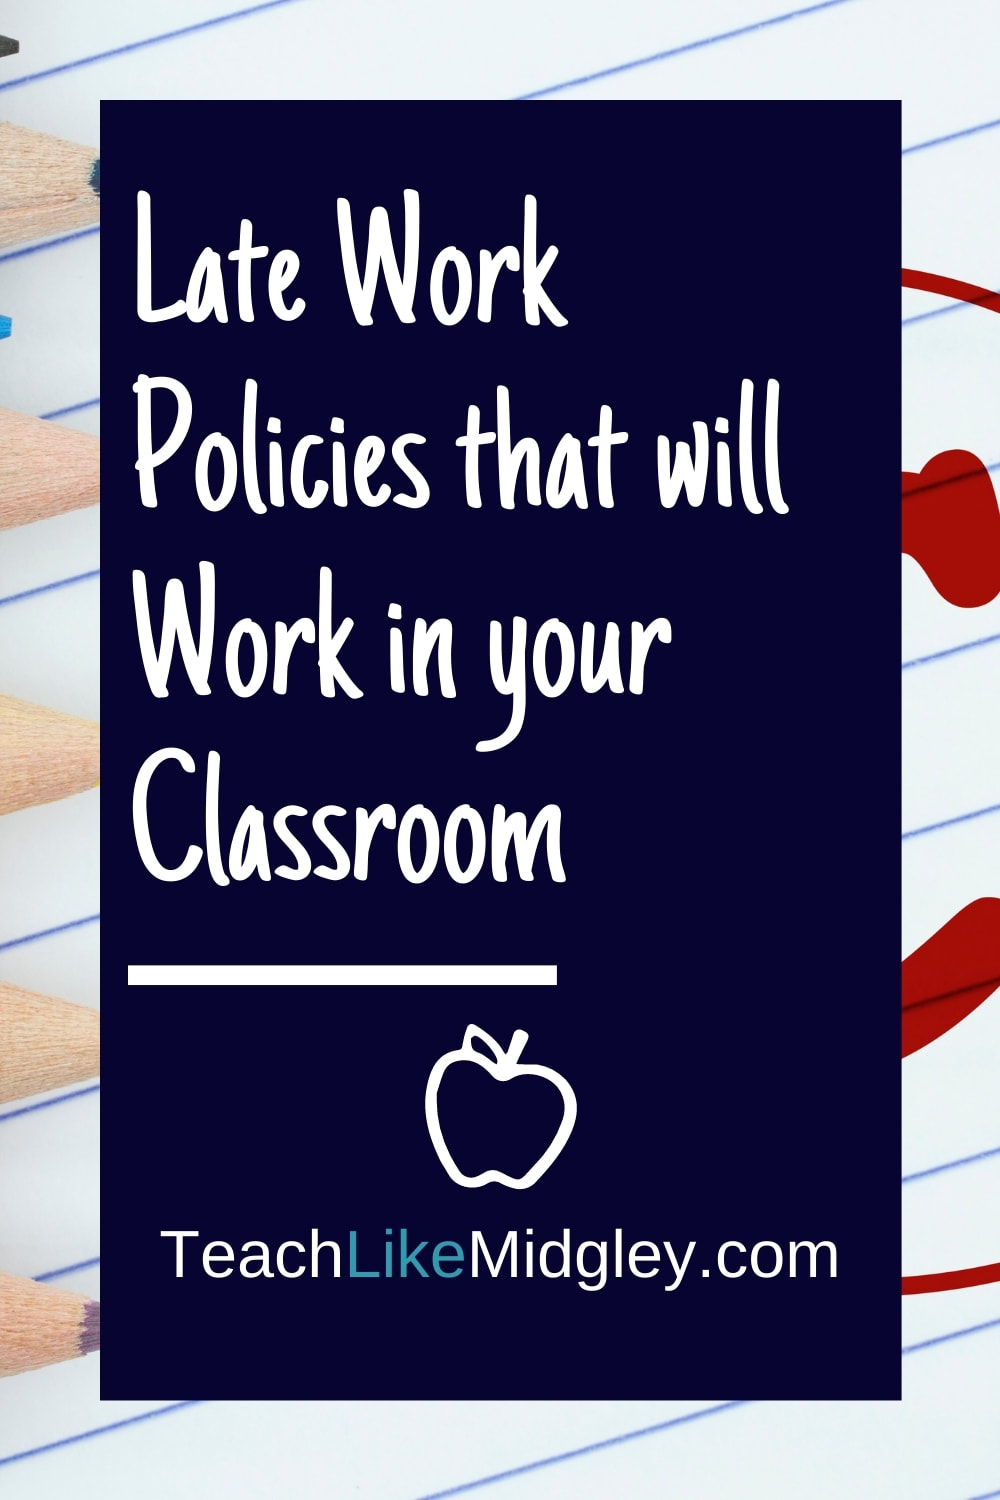 Late Work Policies that will Work in your Classroom